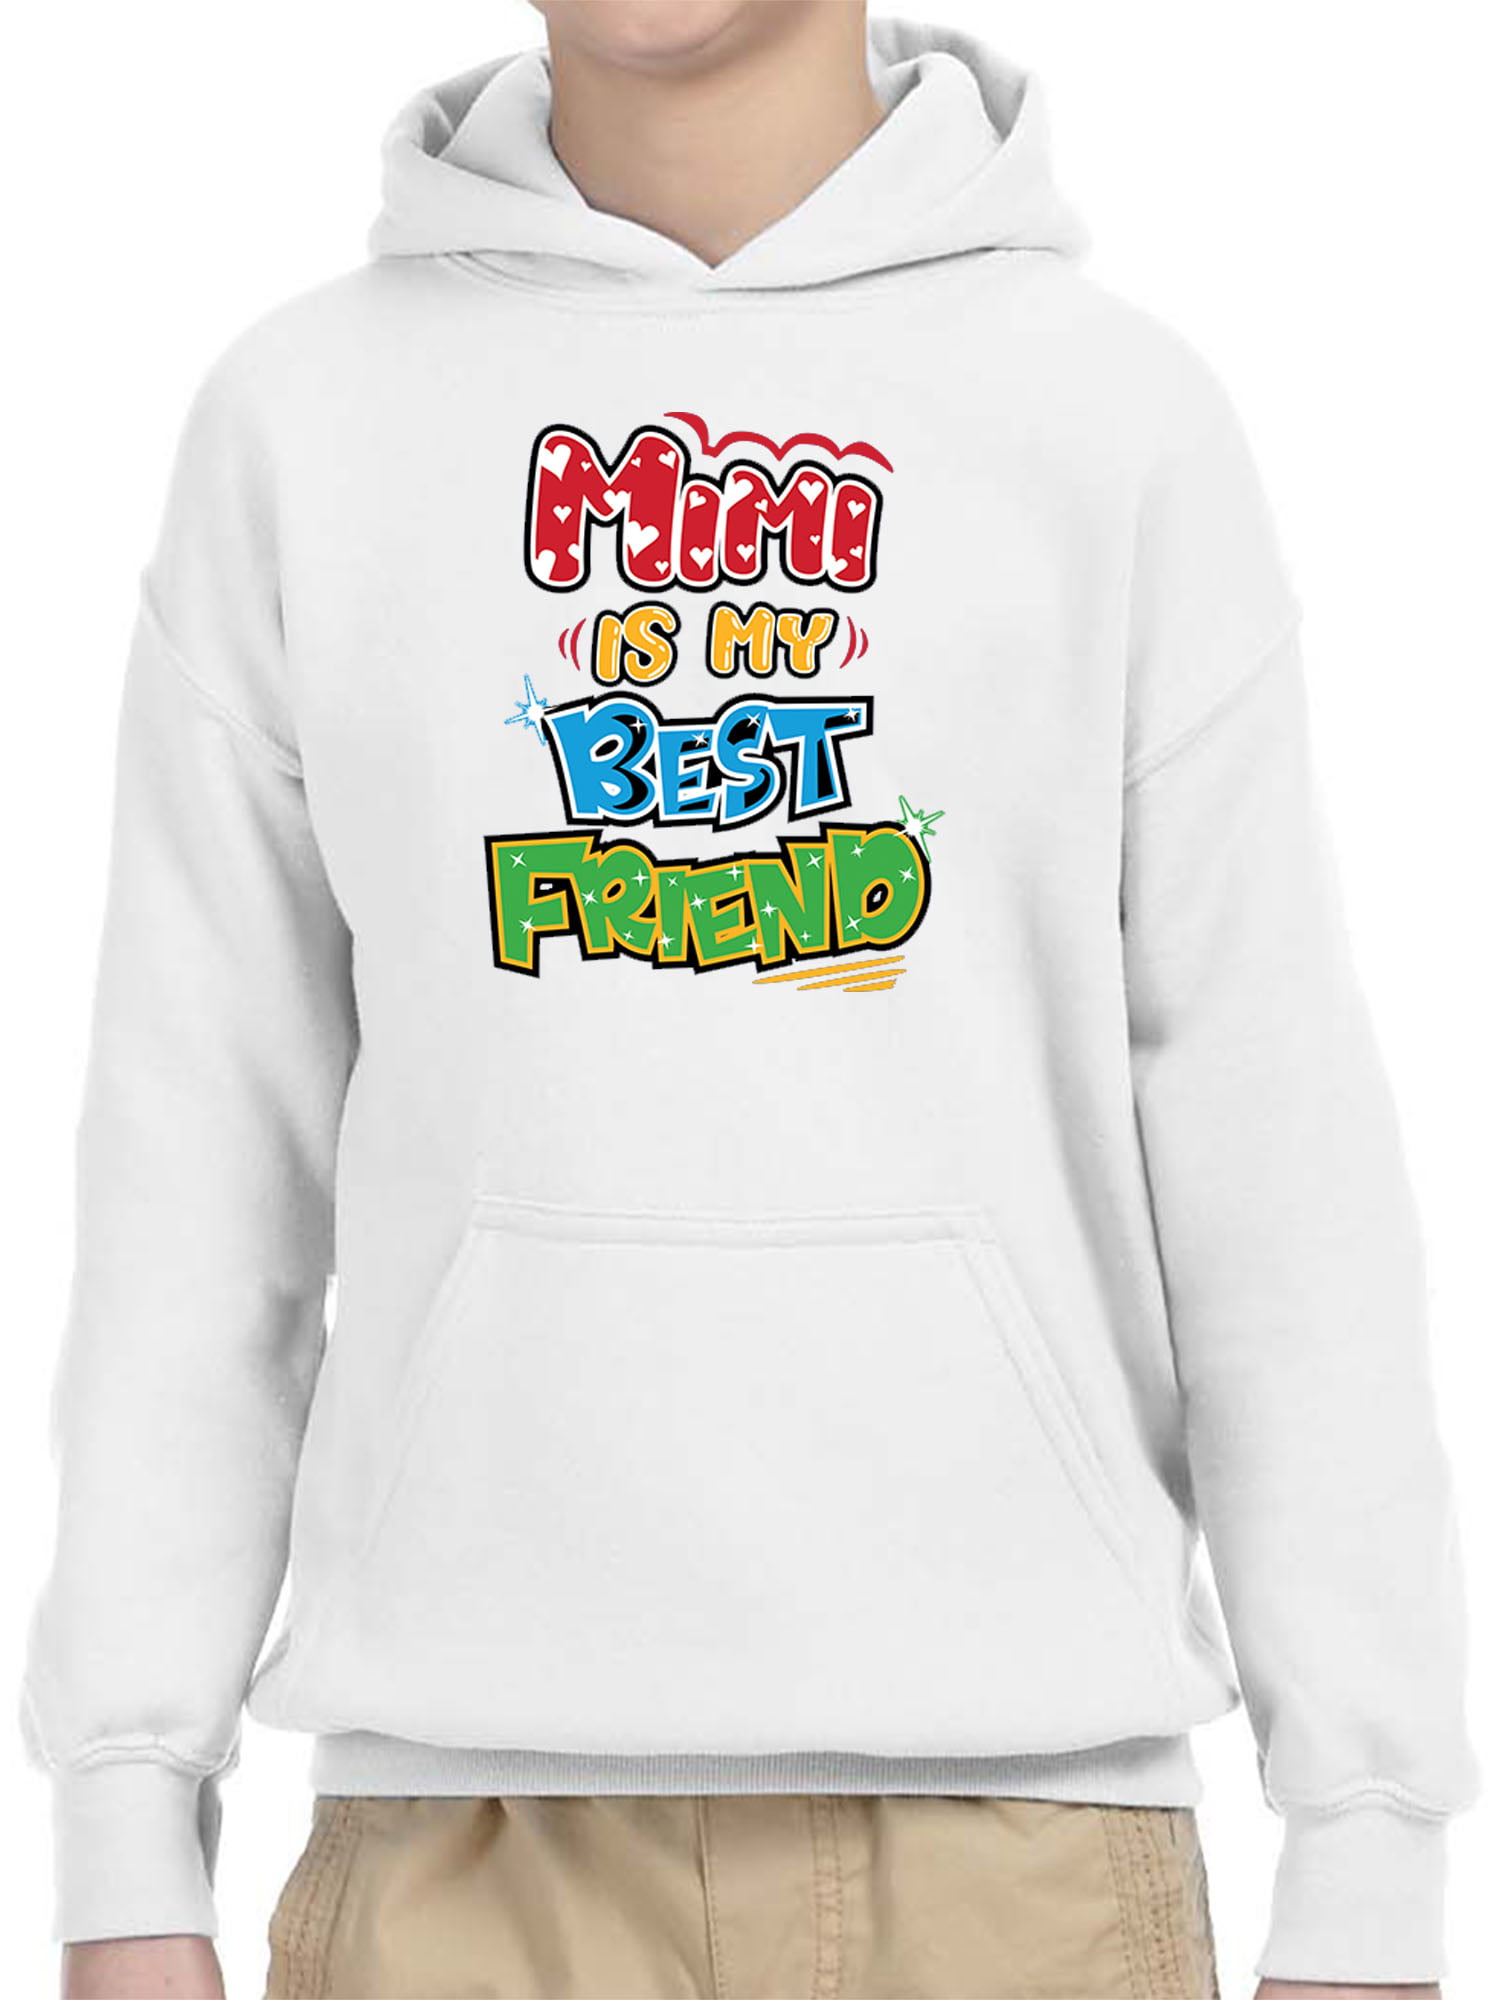 This Is My Gym Details about   Cycling Hoodie Hoody Funny Novelty hooded Top 